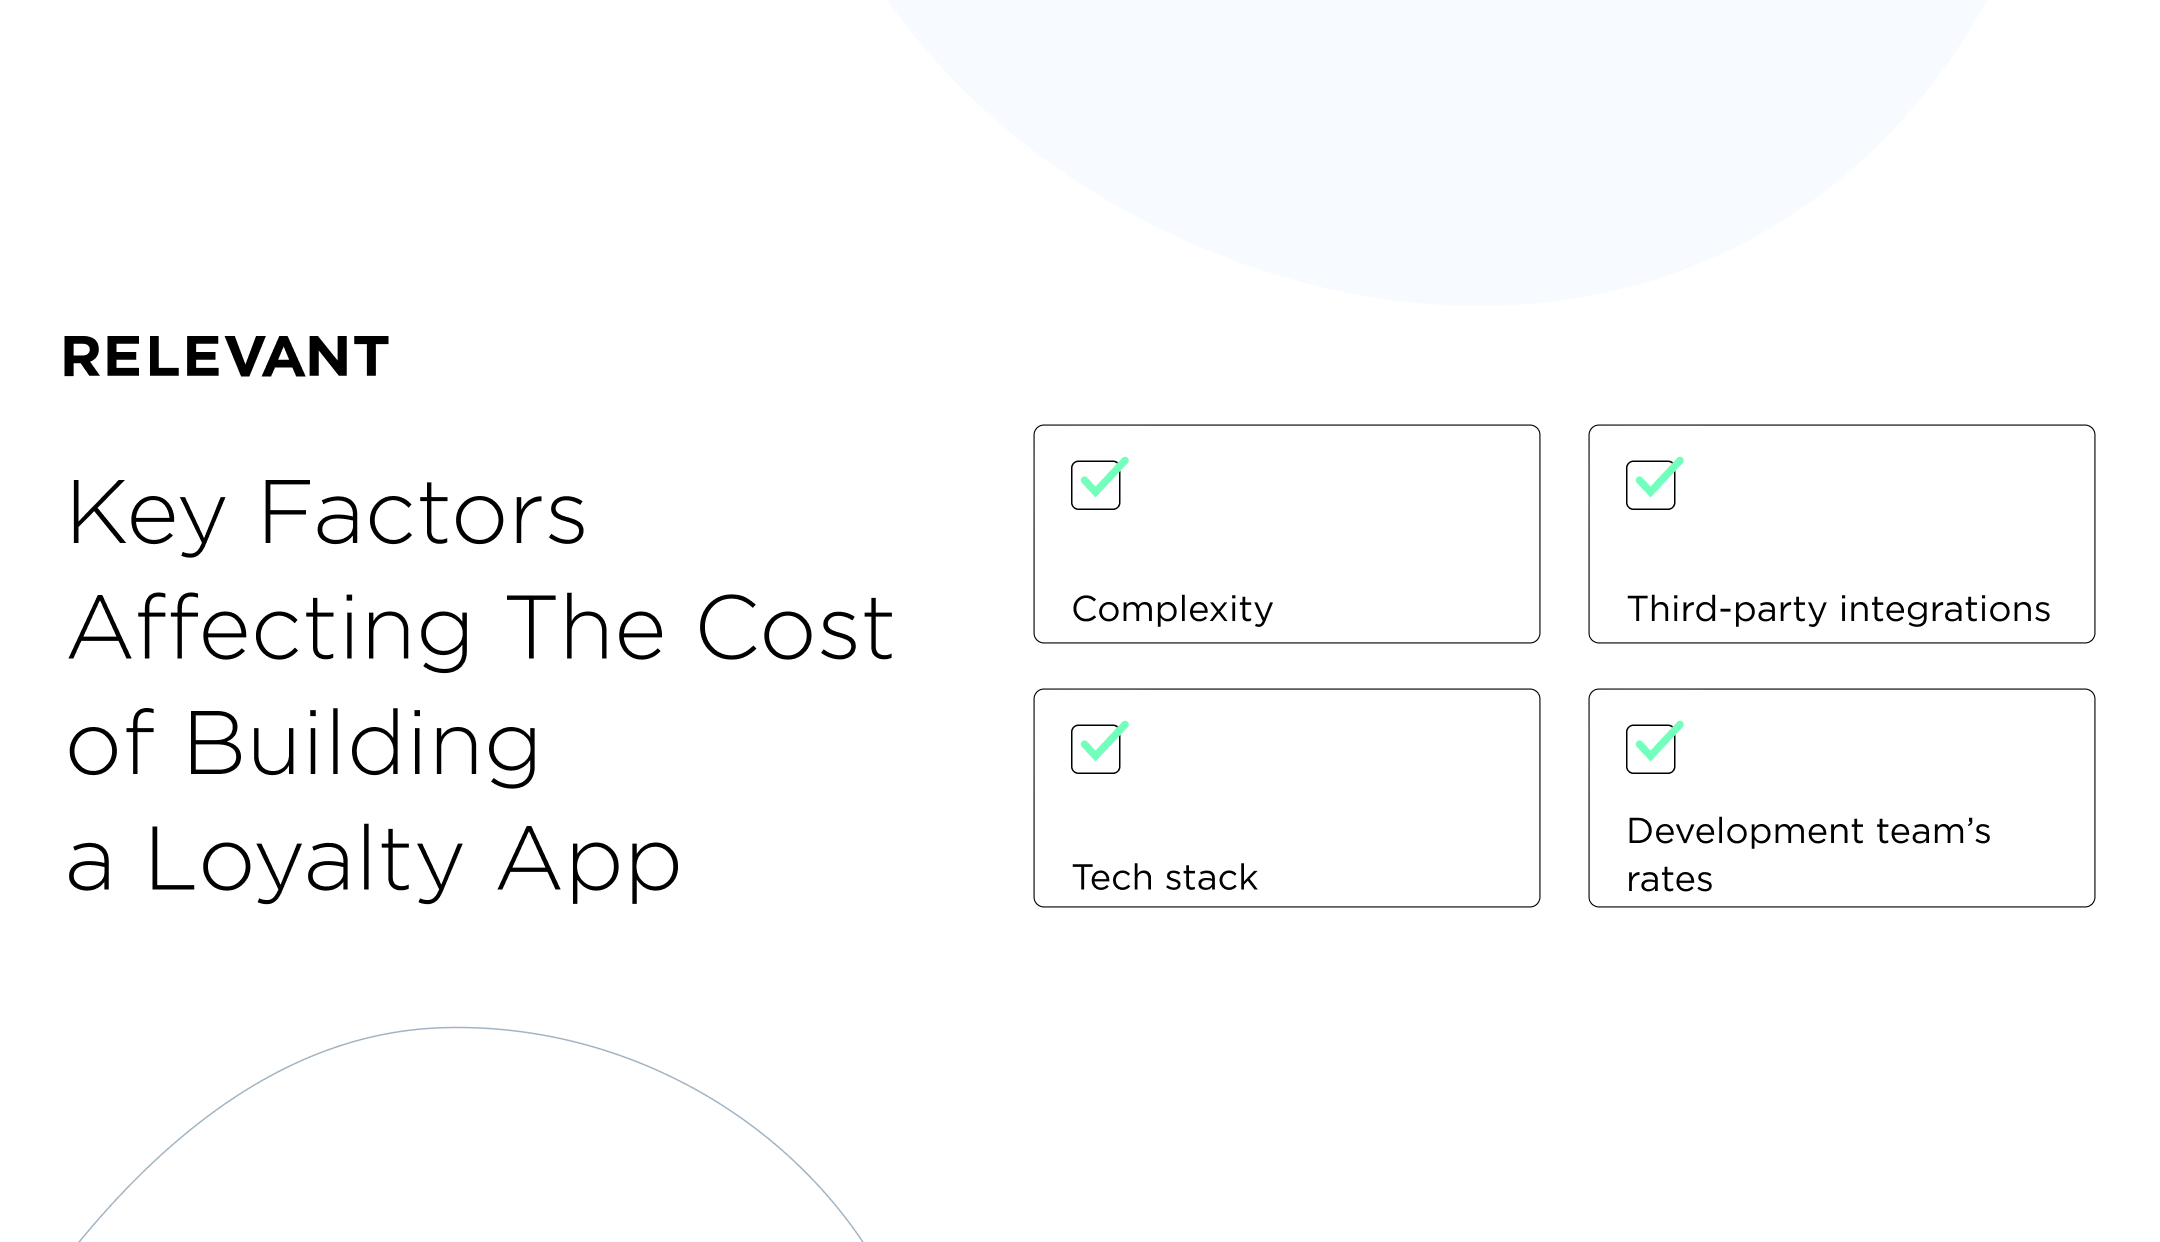 Key Factors Affecting The Cost of Building a Loyalty App